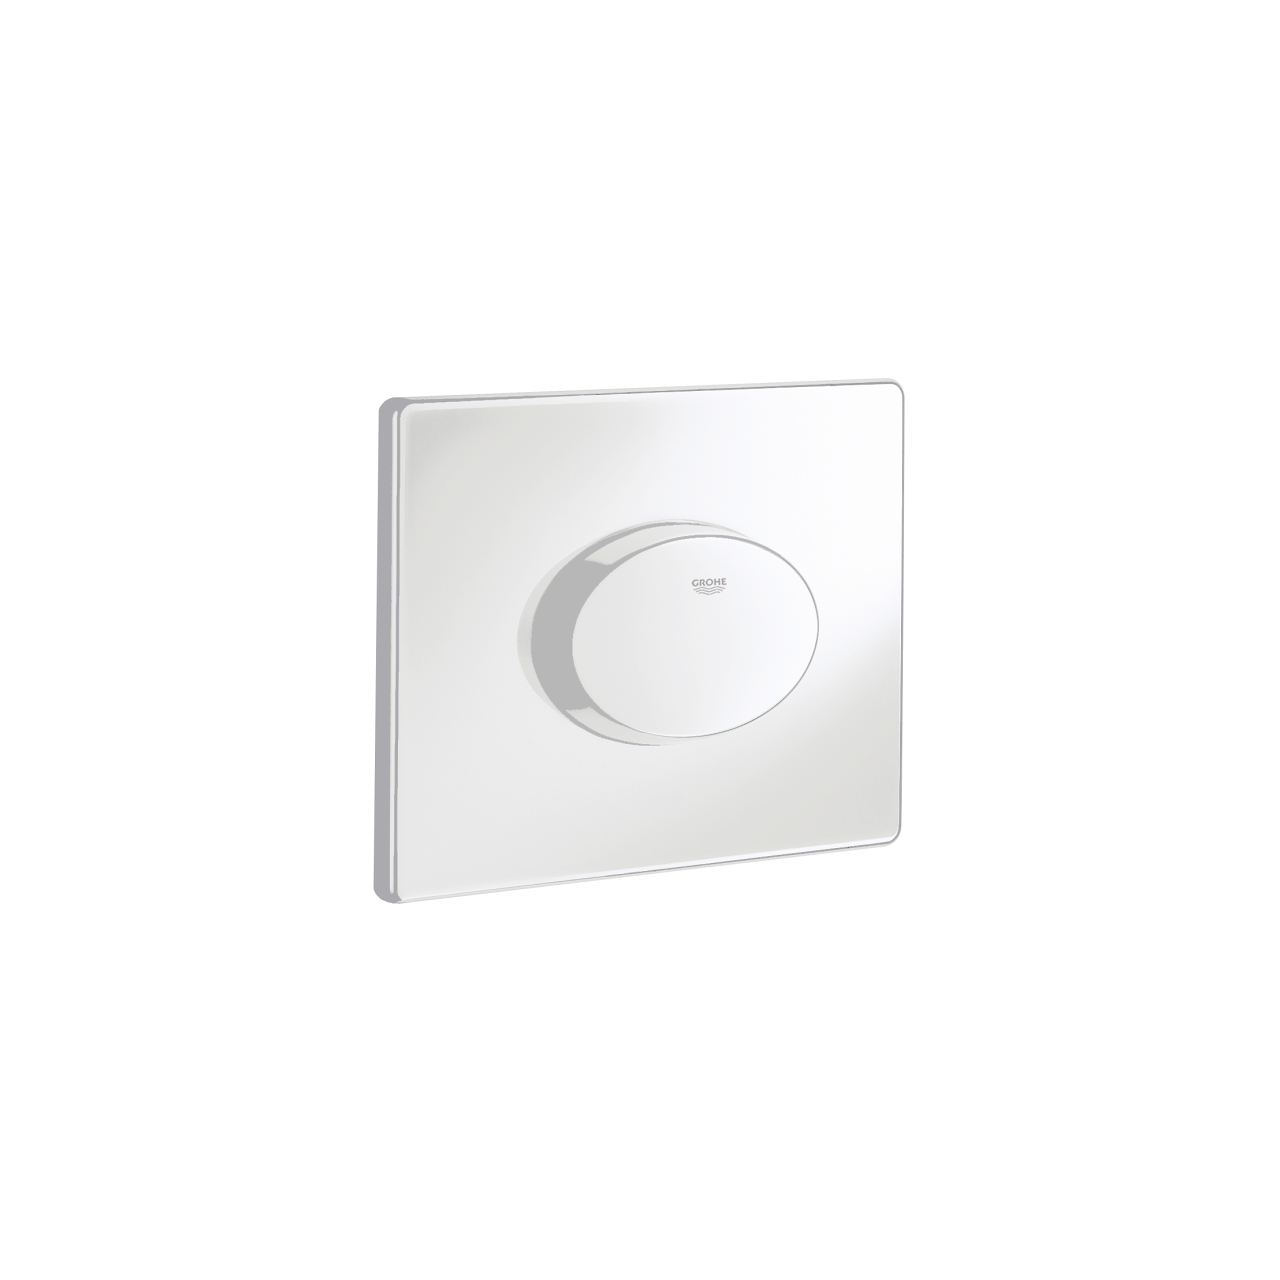 GROHE SKATE WALL PLATE WHITE